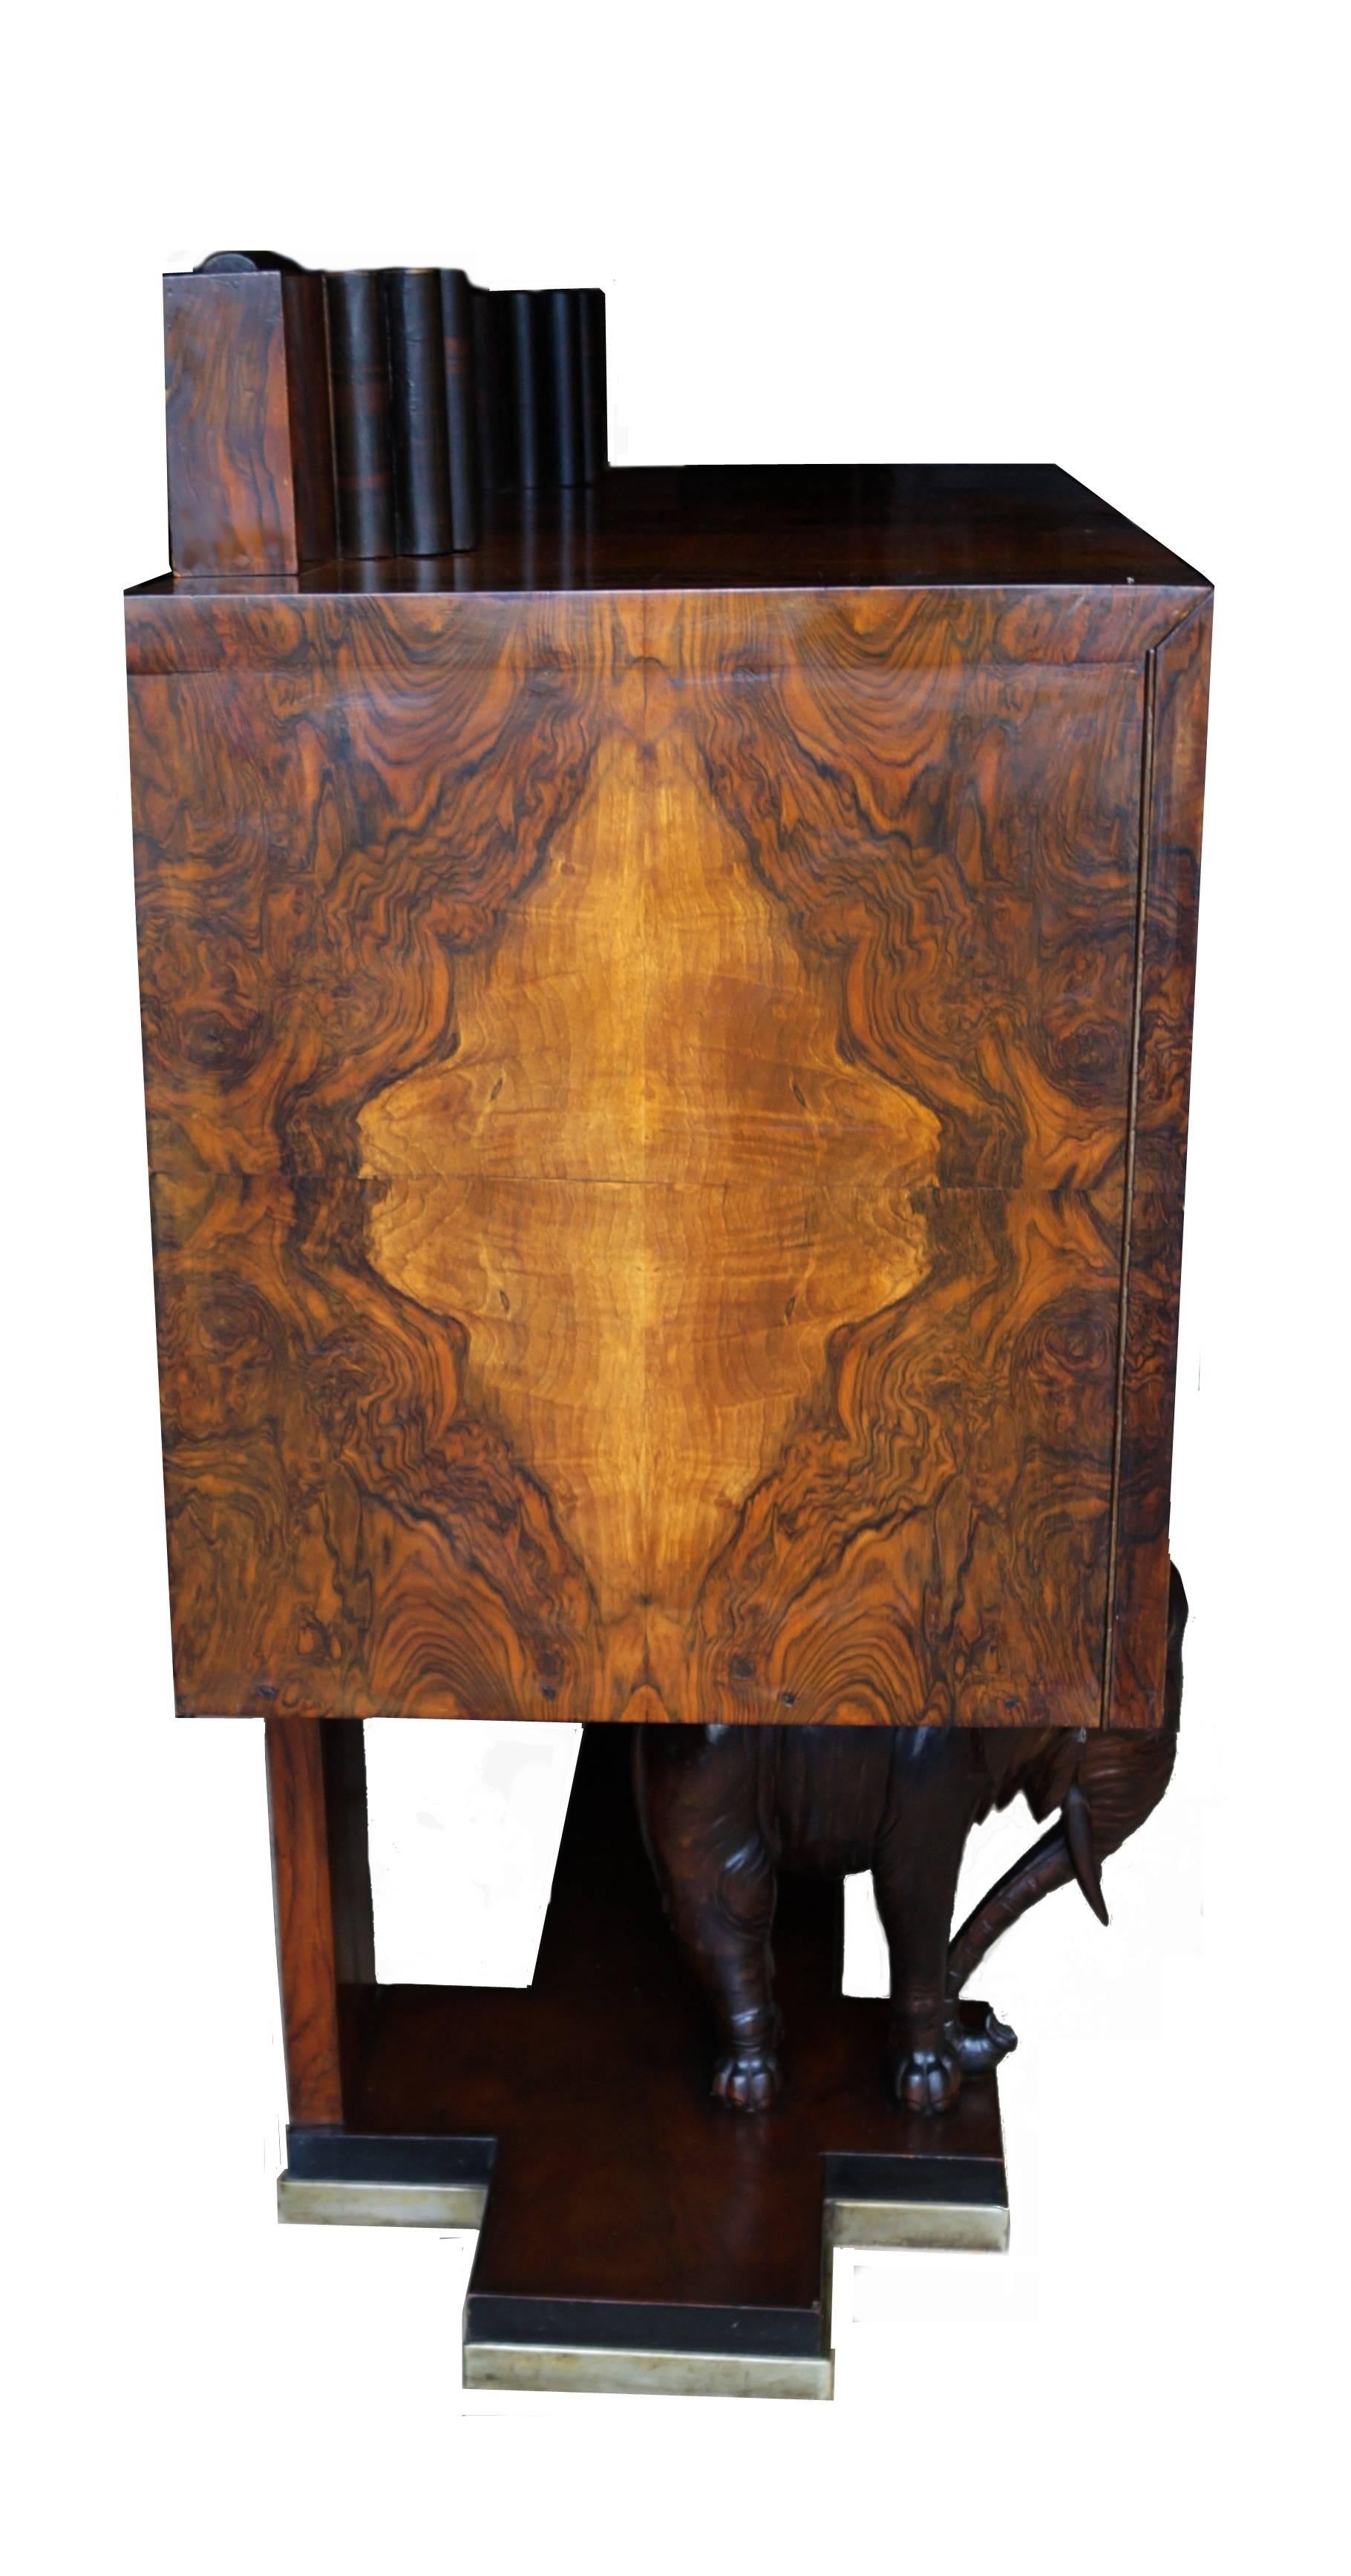 Figural Art Deco Burl Wood Carved Elephant Sideboard Buffet Credenza Console 2